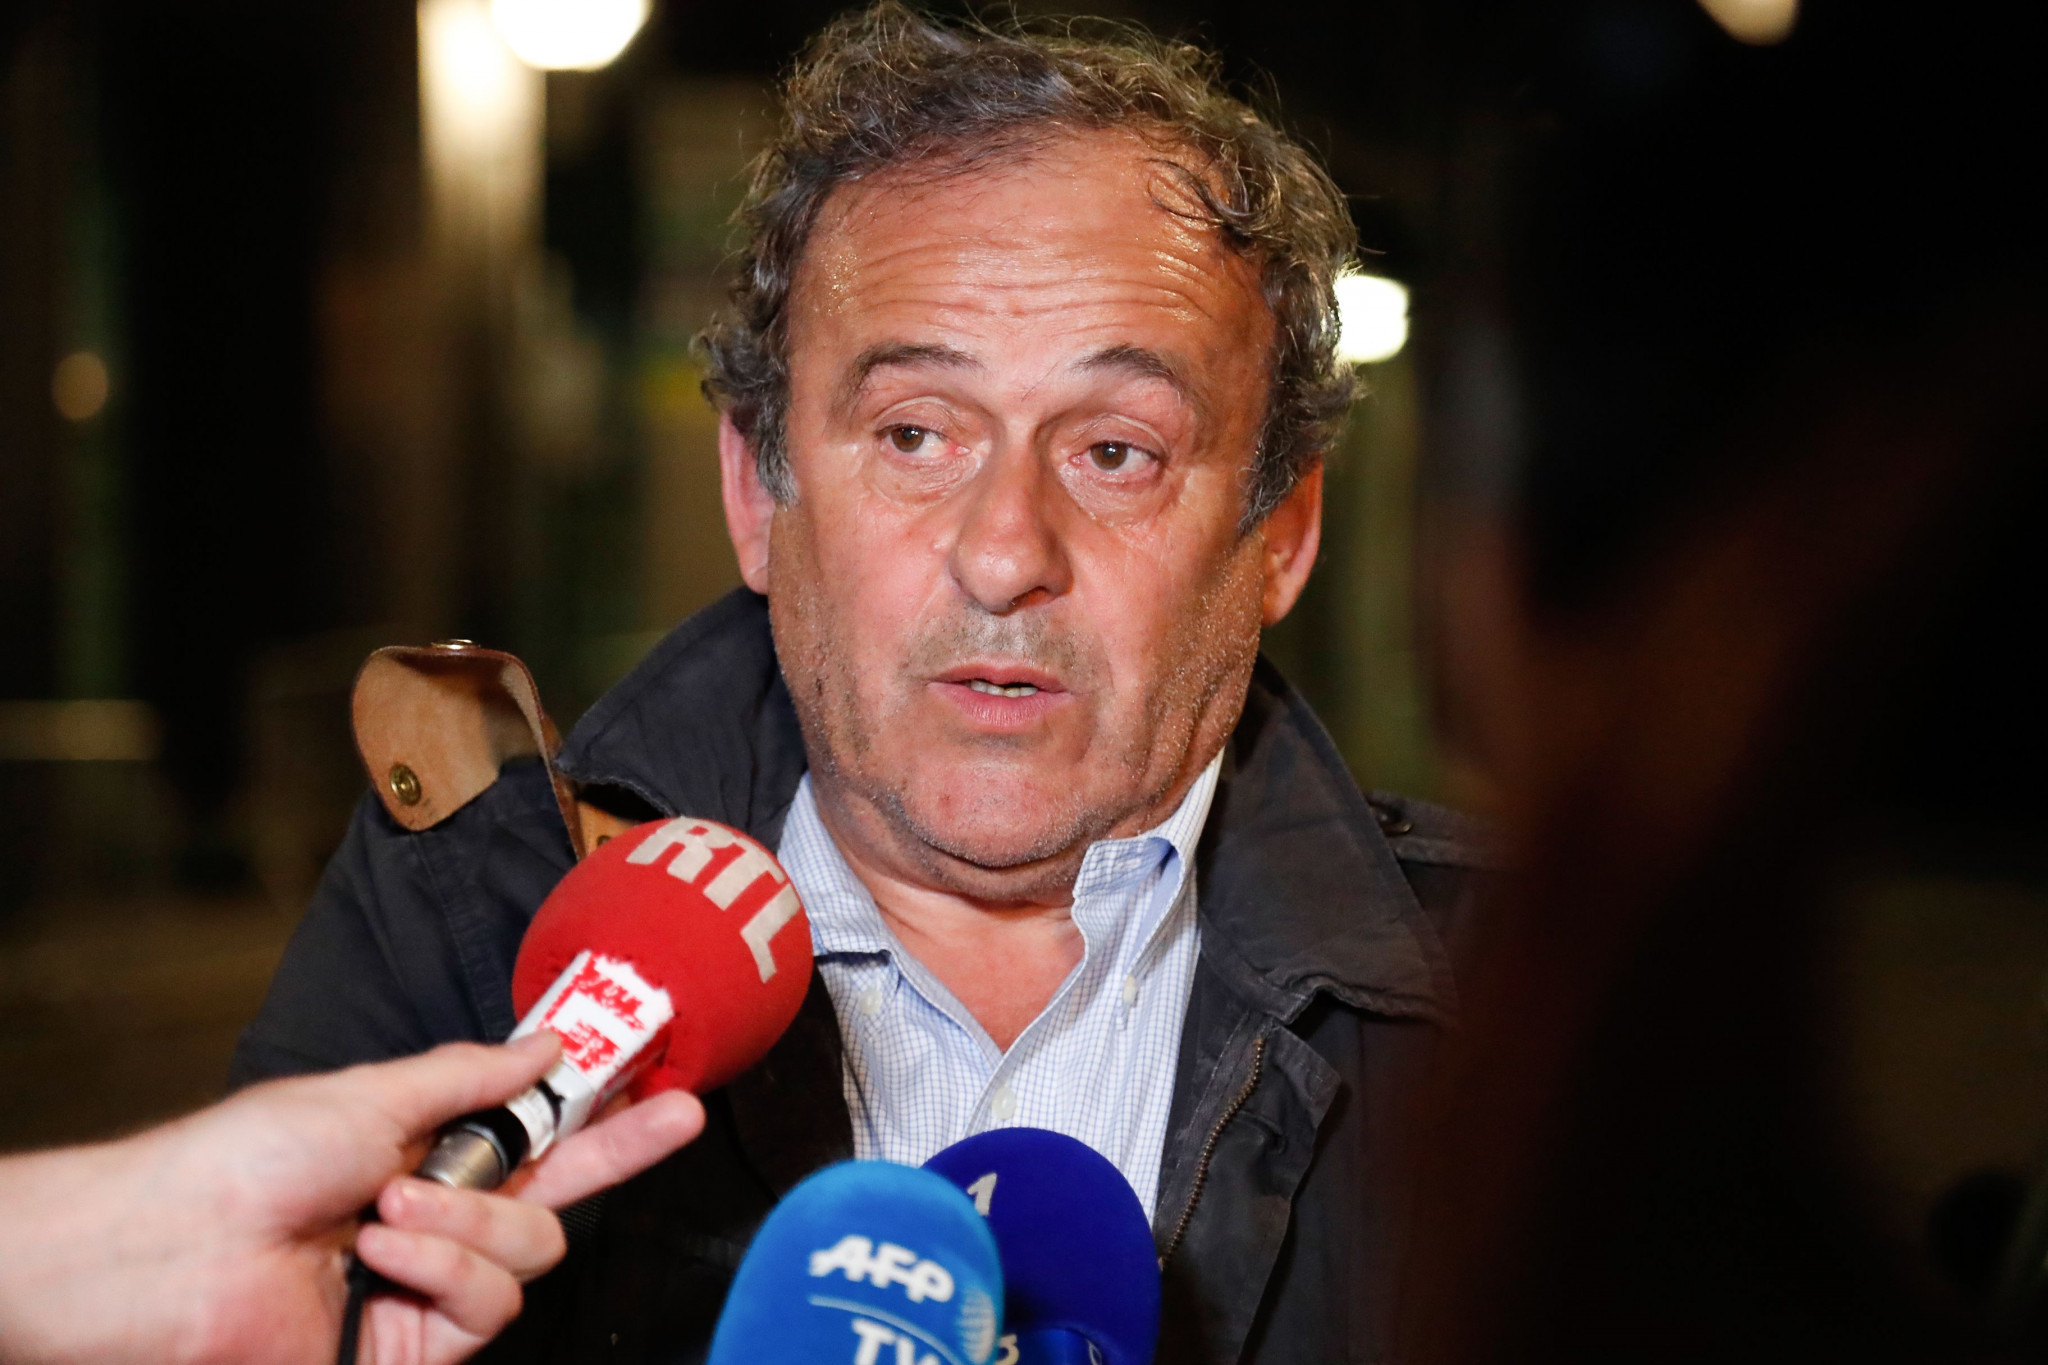 Michel Platini has said he is "hurt" after he was detained for questioning ©Getty Images